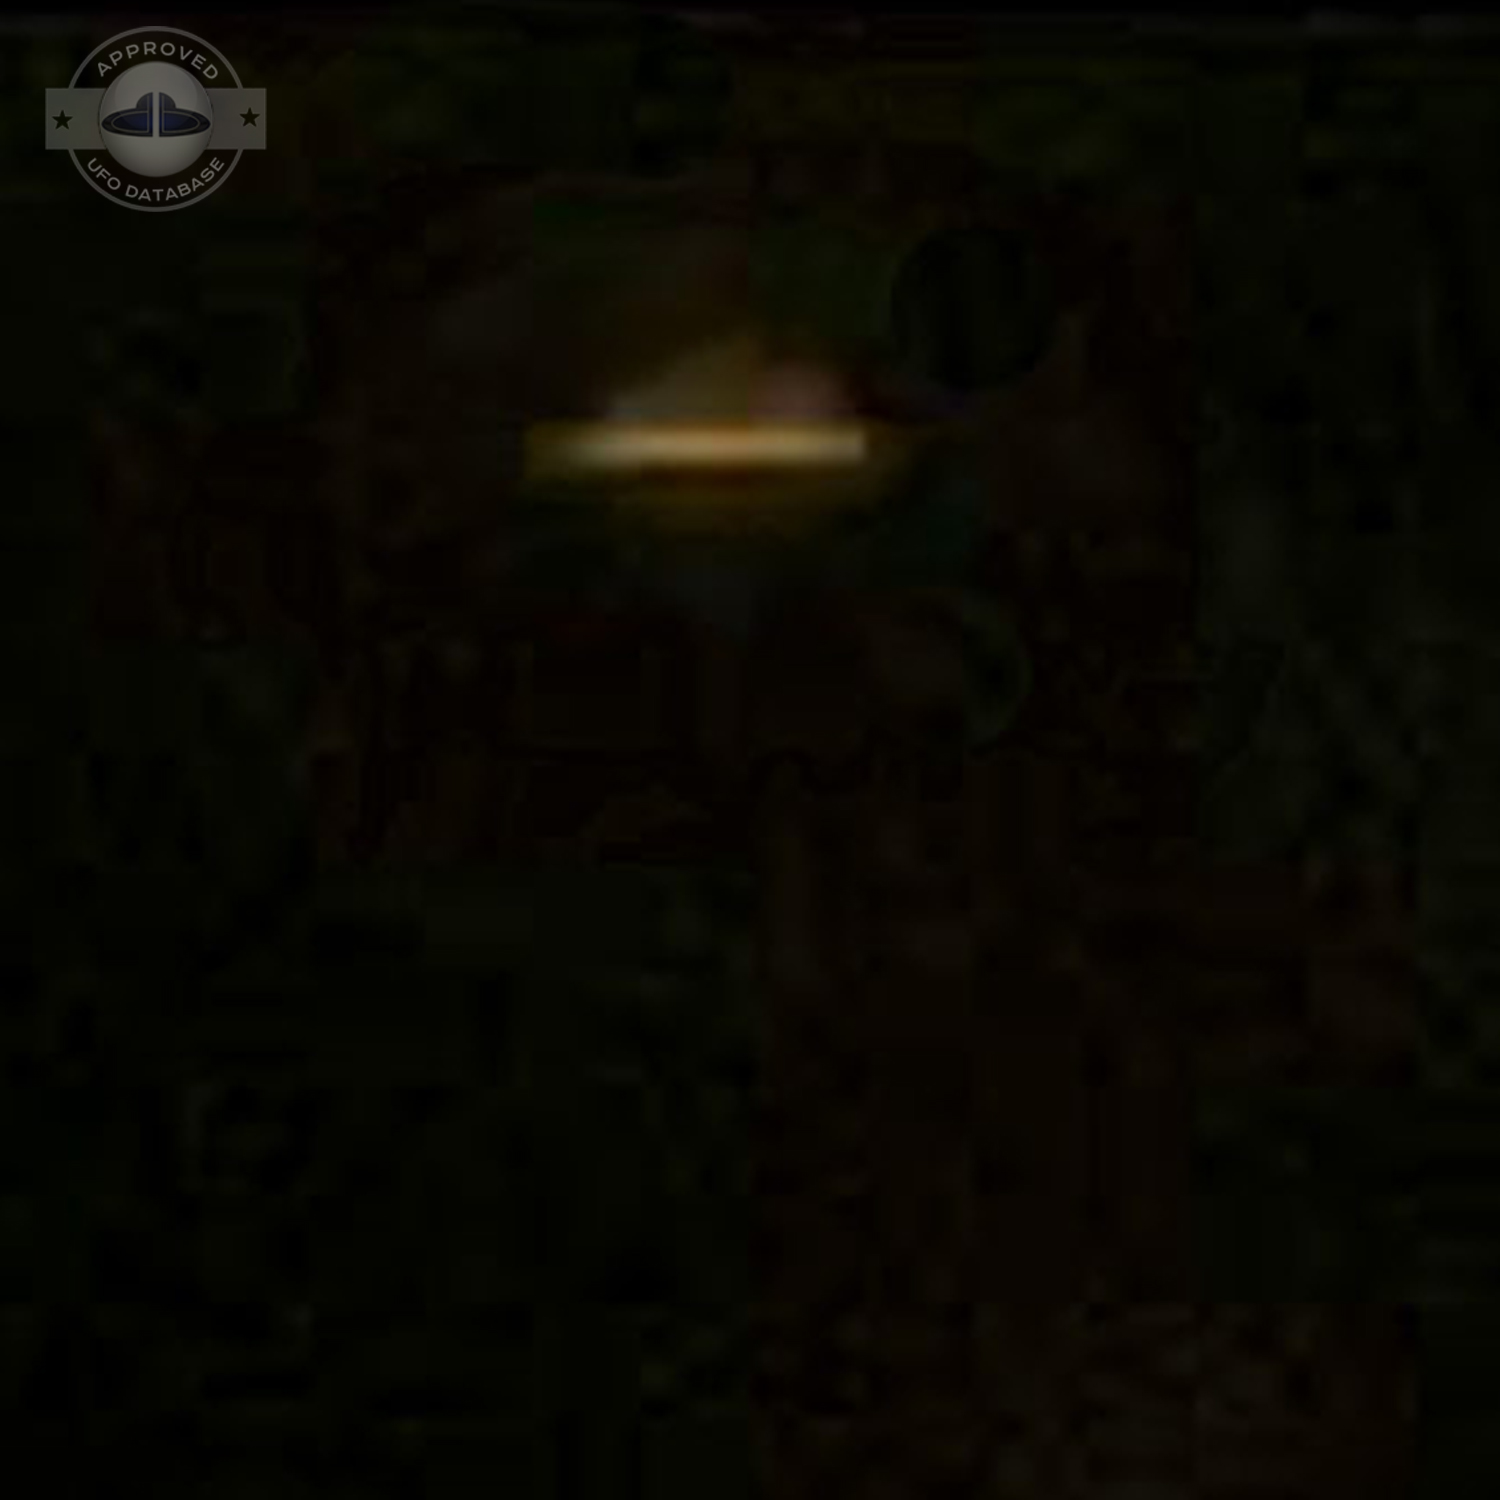 A Ufo is flying at night over the city of Kingston - December 2004 UFO Picture #25-3